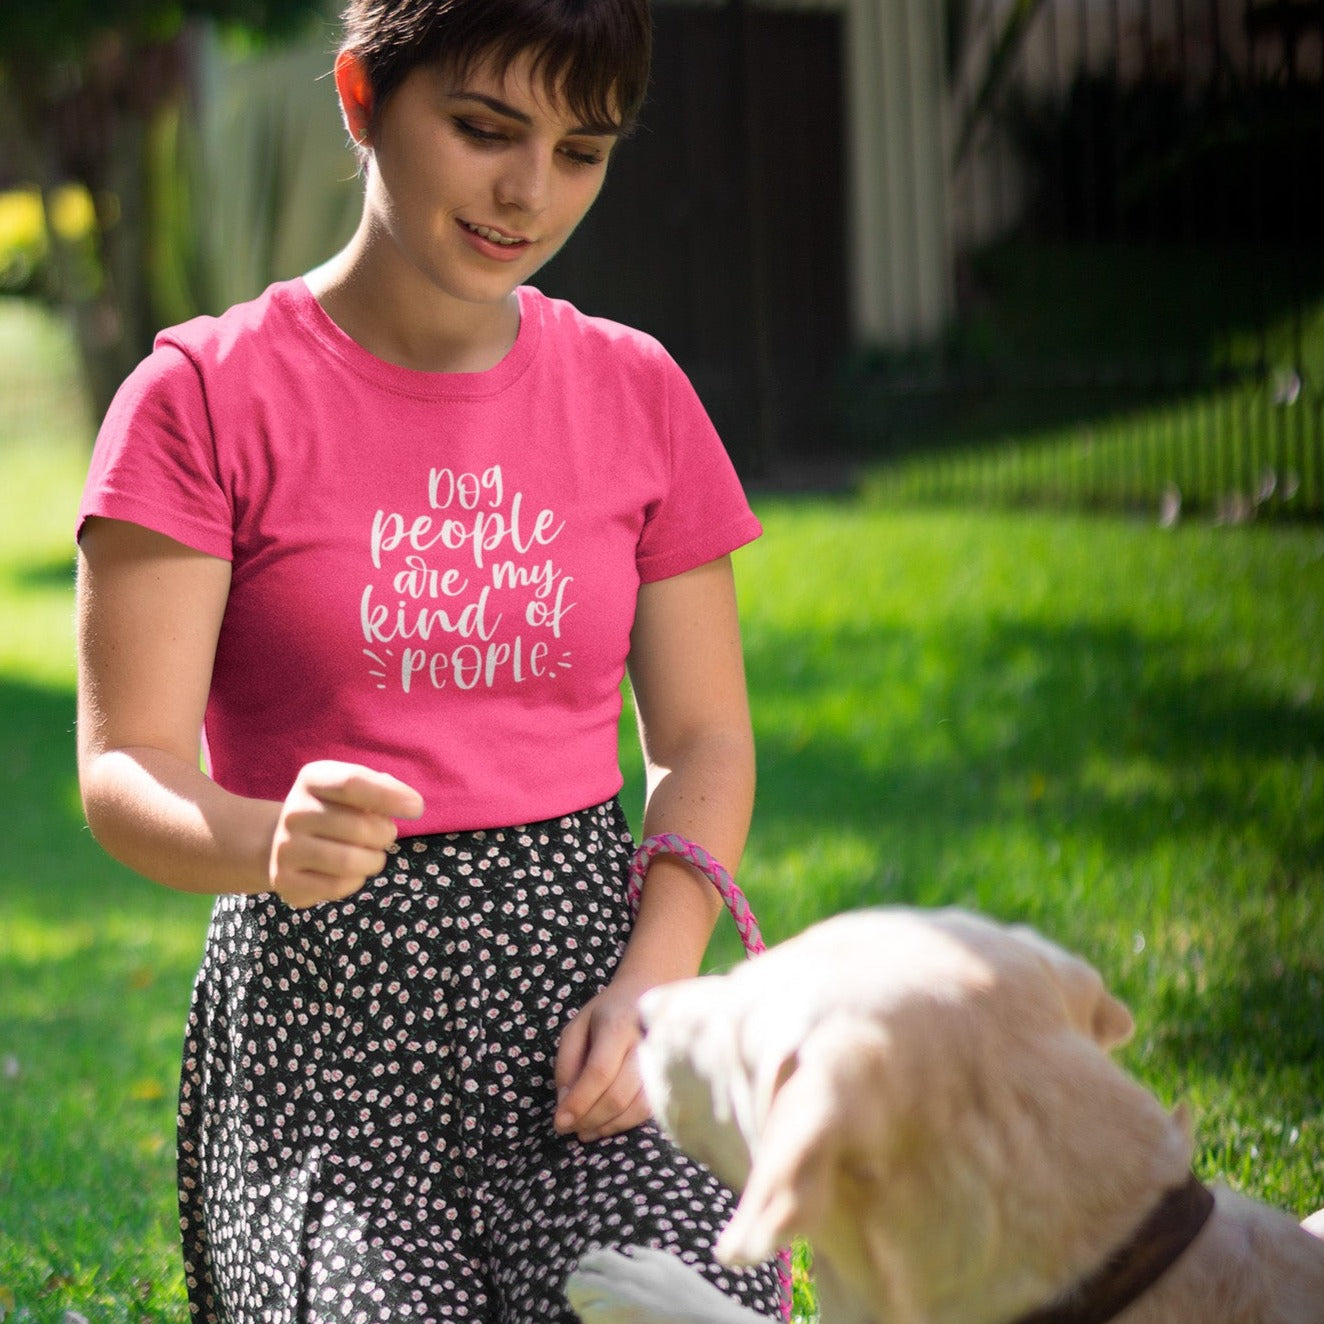 dog-people-are-my-kind-of-people-berry-t-shirt-animal-lover-pretty-girl-training-her-dog-while-wearing-a-round-neck-tee-mockup